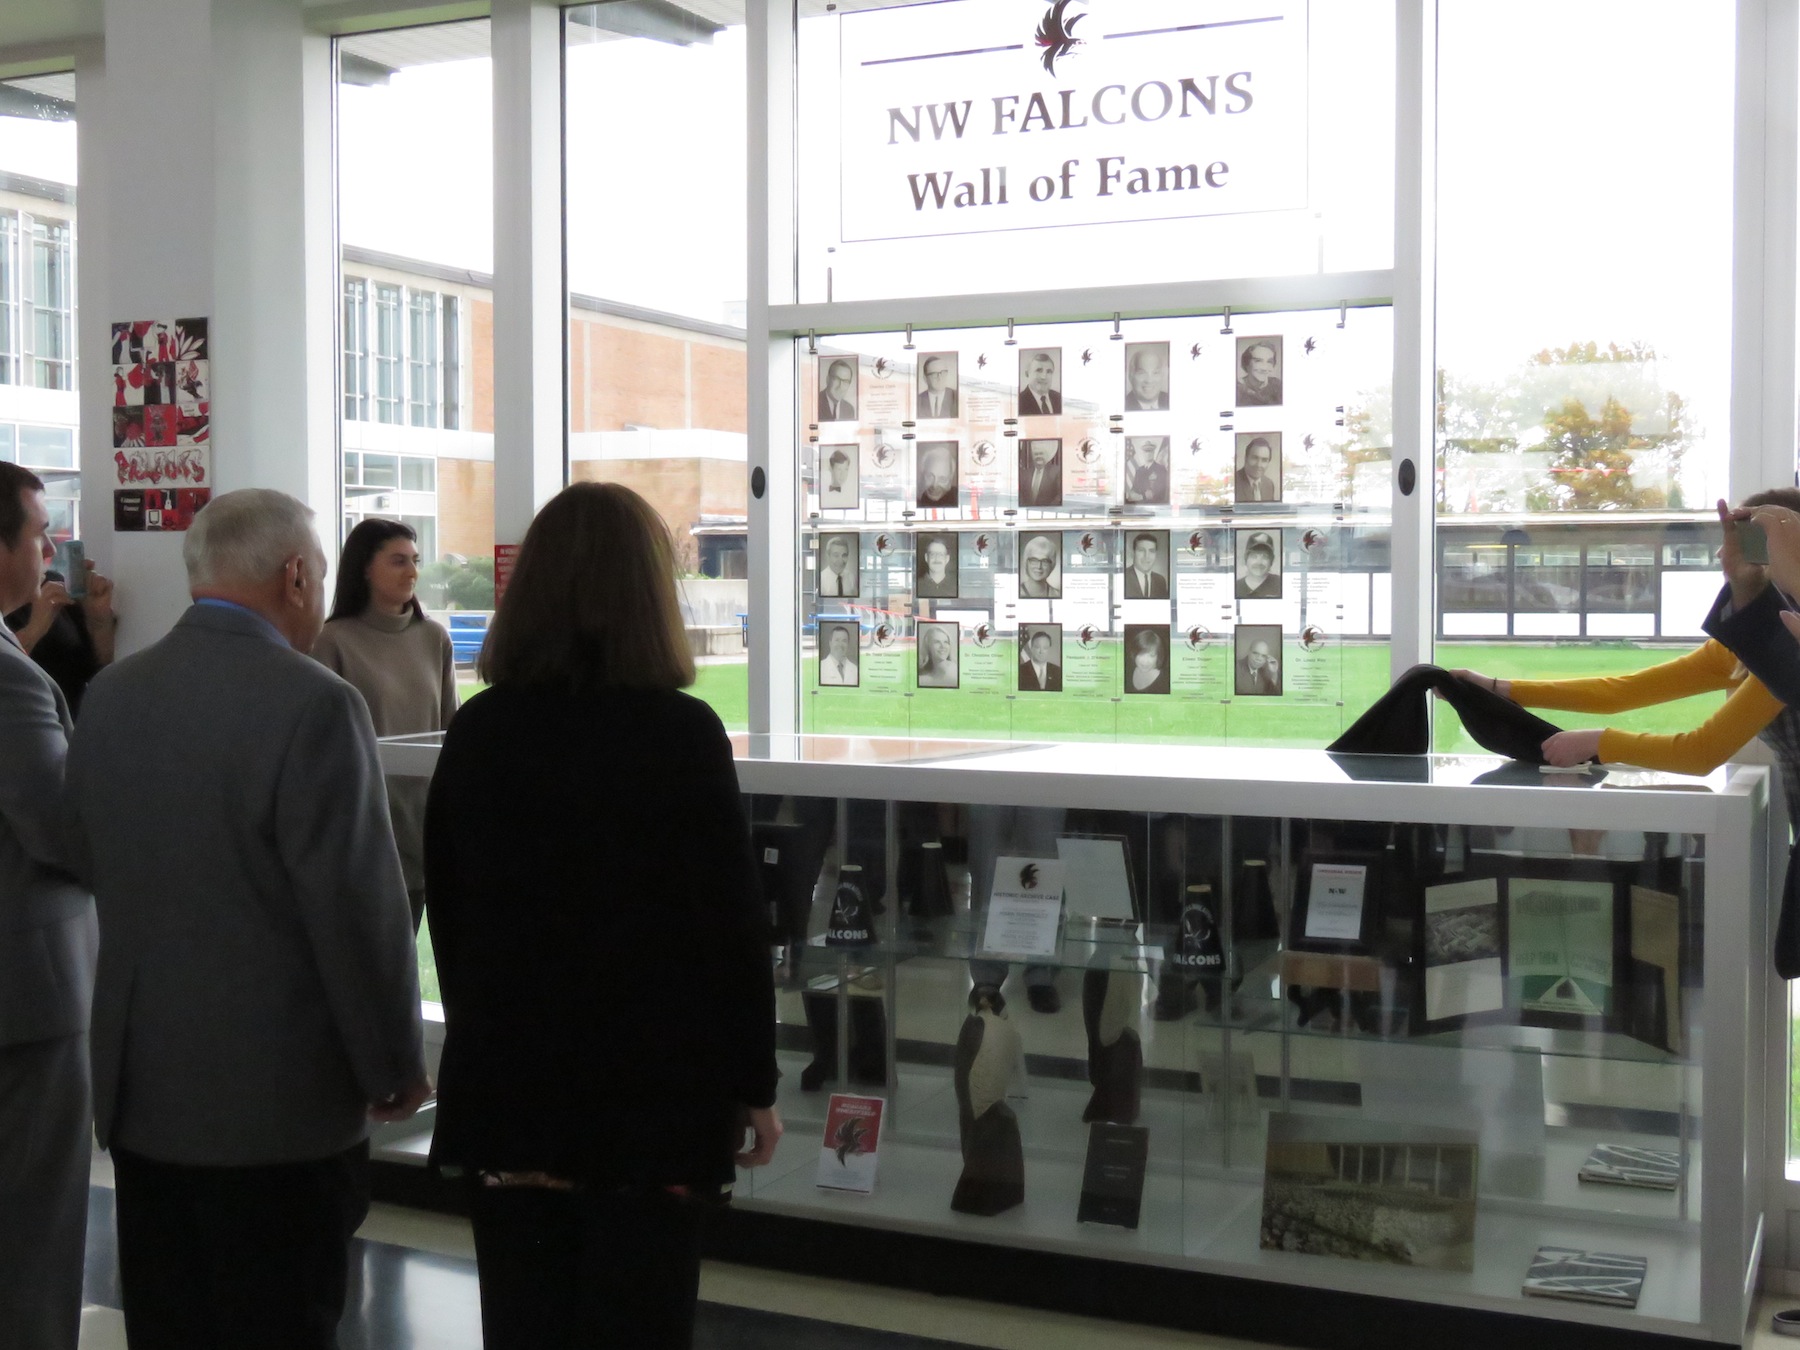 Newly inducted members see their faces on the Falcon Wall of Fame. (Photos by David Yarger)